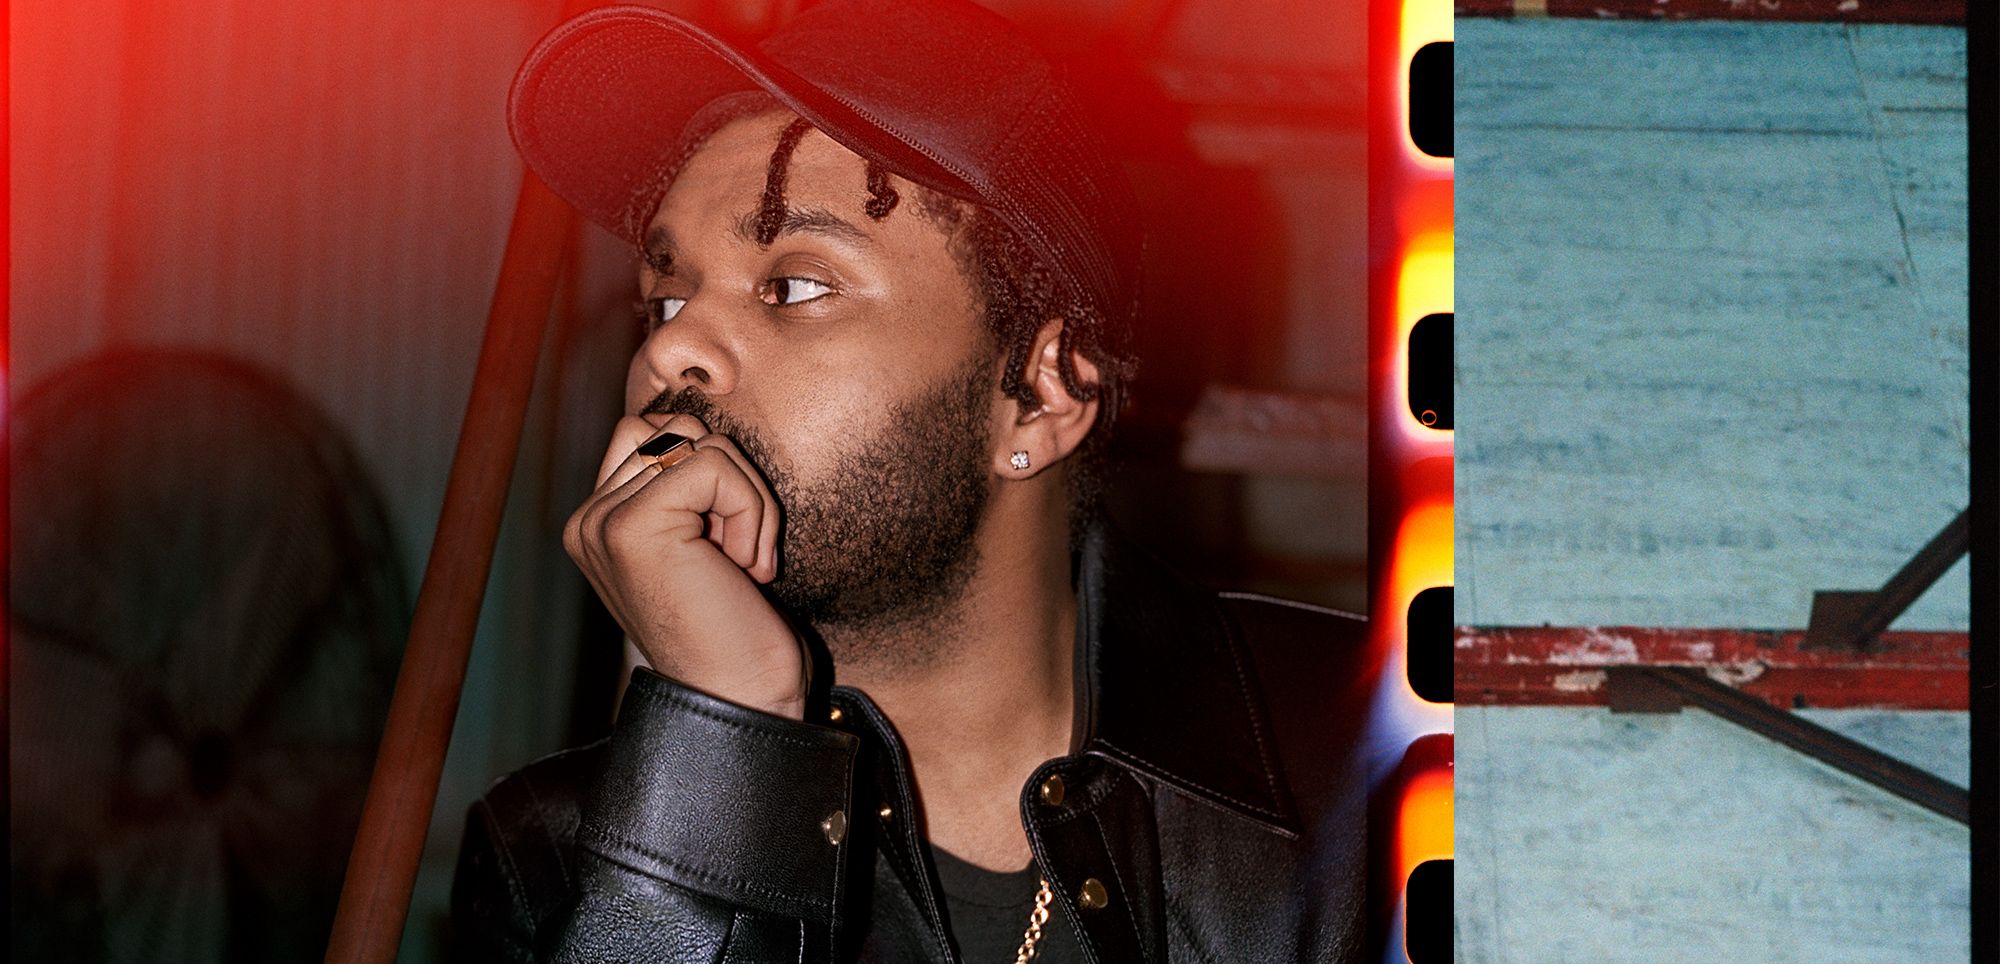 The Weeknd Album Review - 'Dawn FM' Is The Weeknd's Prince Moment